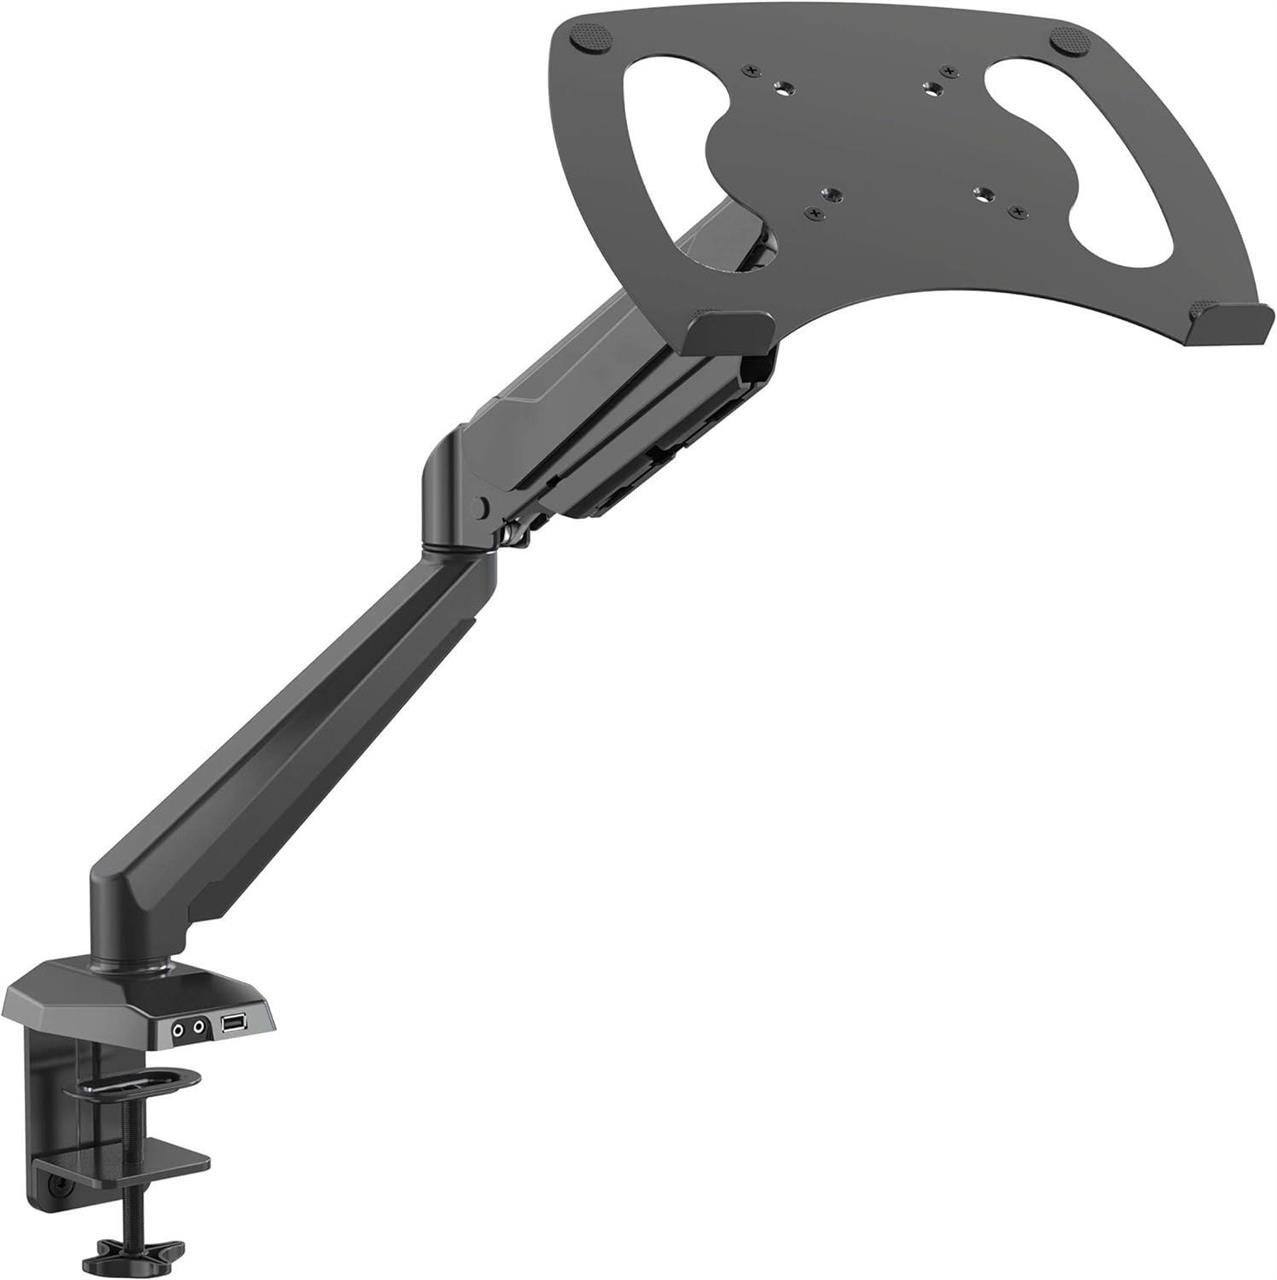 SHOPPINGALL 17 Laptop Mount Stand